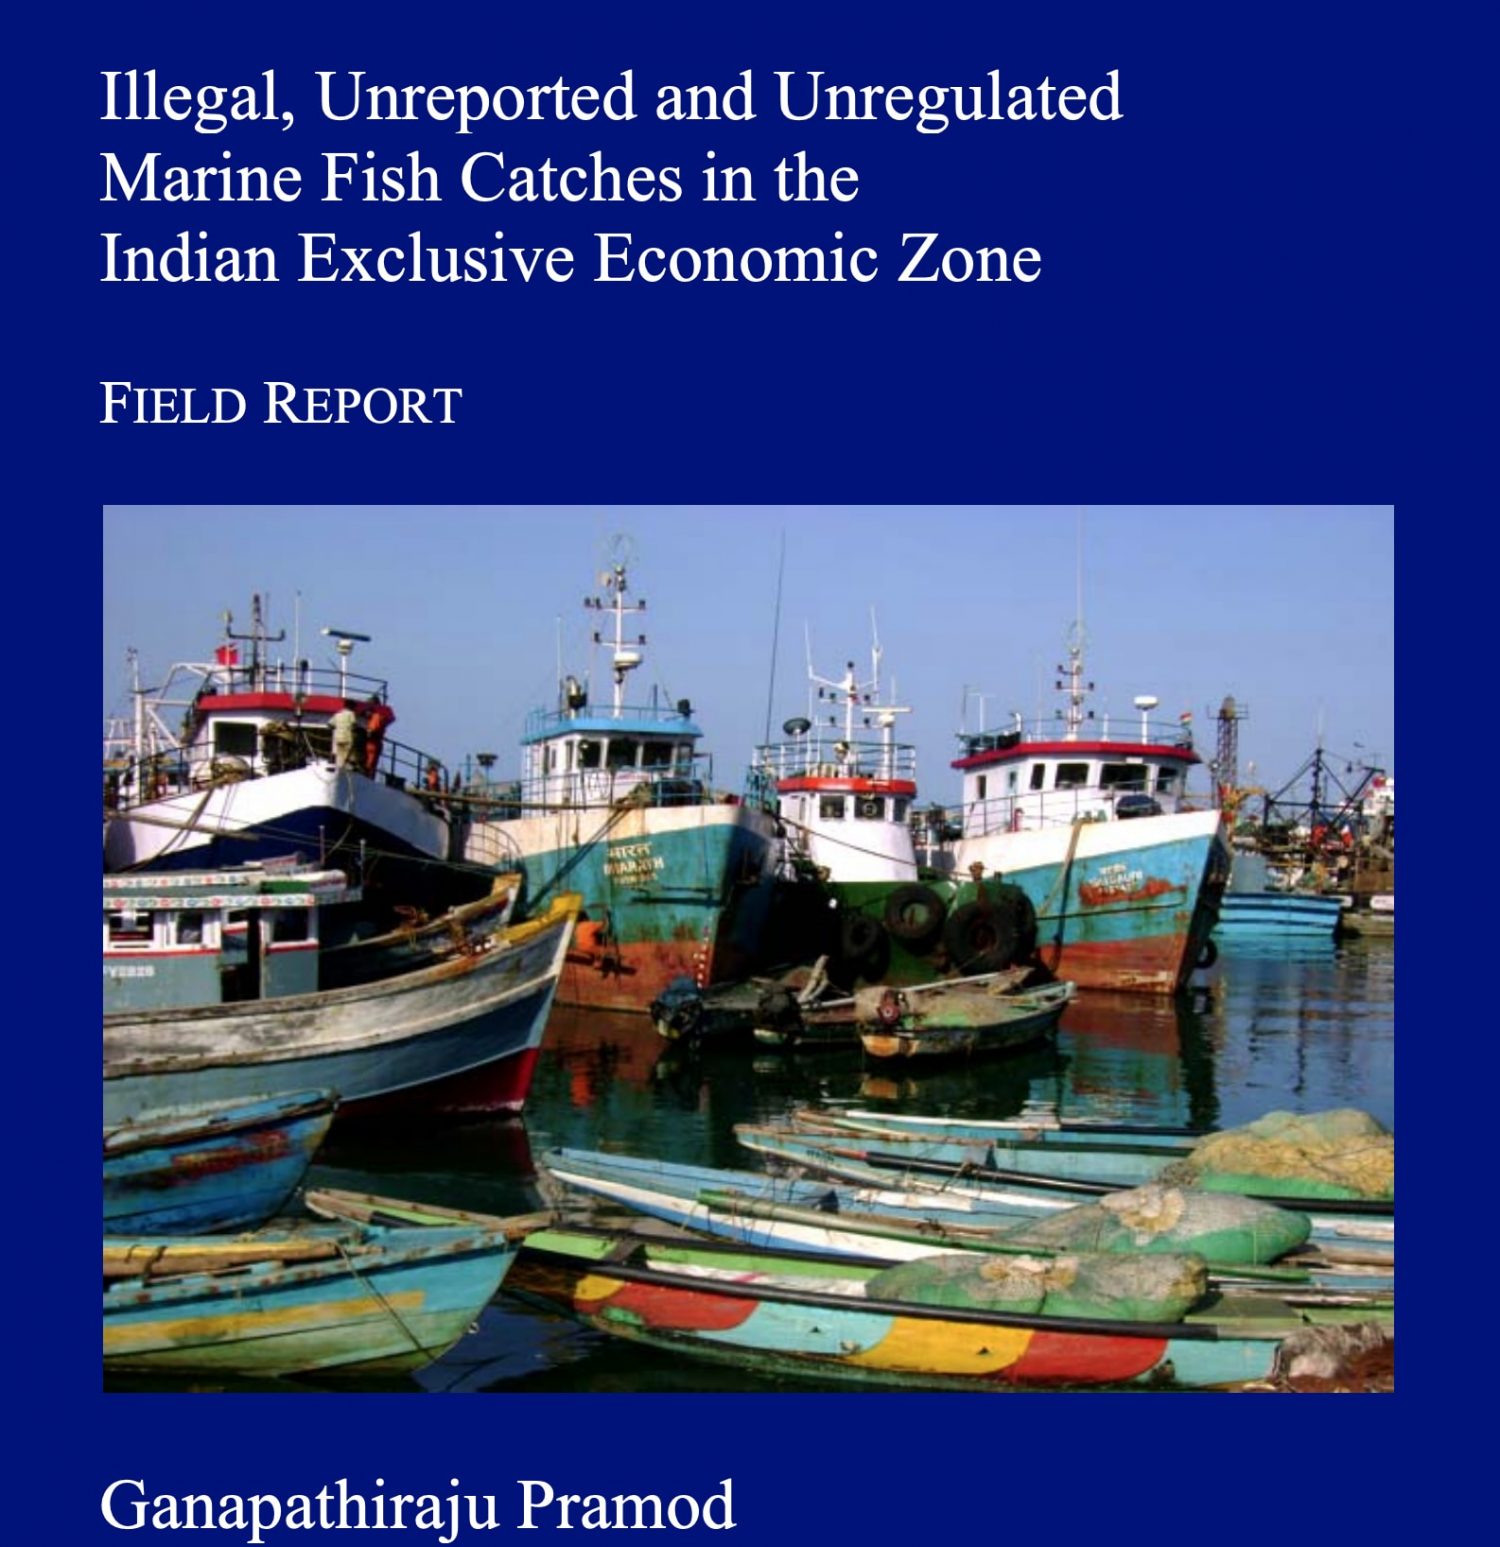 Illegal, Unreported, and Unregulated Marine Fish Catches in the Indian Exclusive Economic Zone